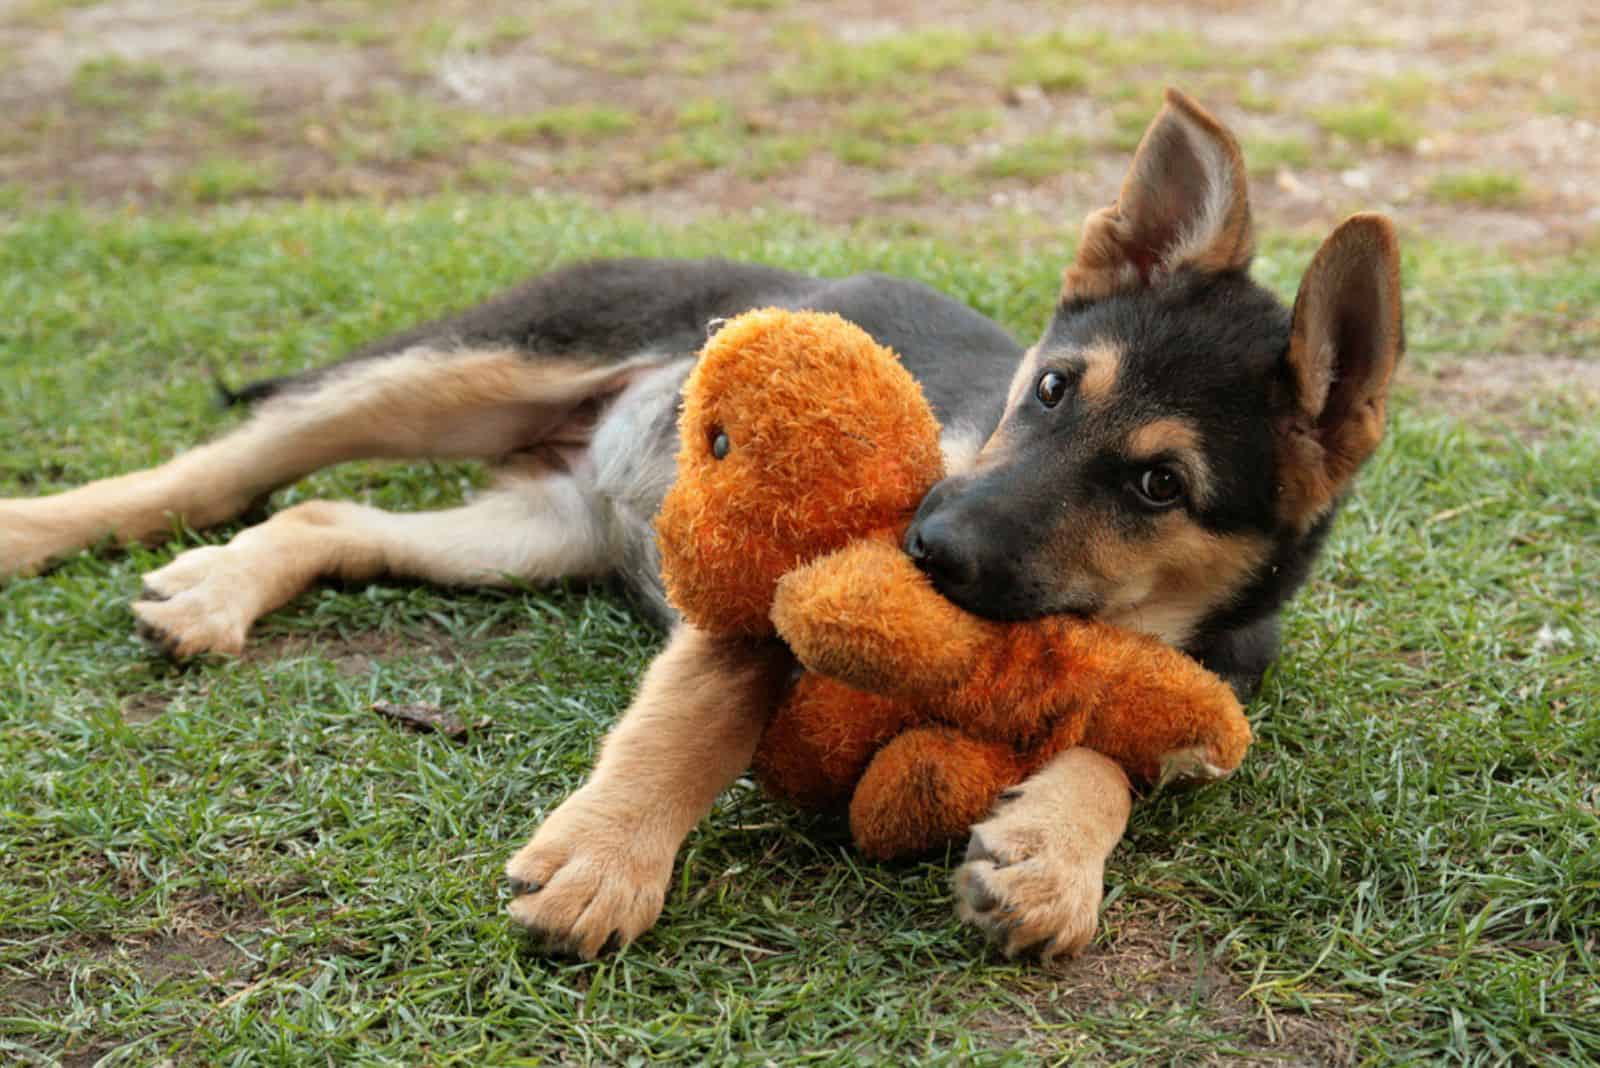 What Things German Shepherds Love? These Are Its 6 Favorites